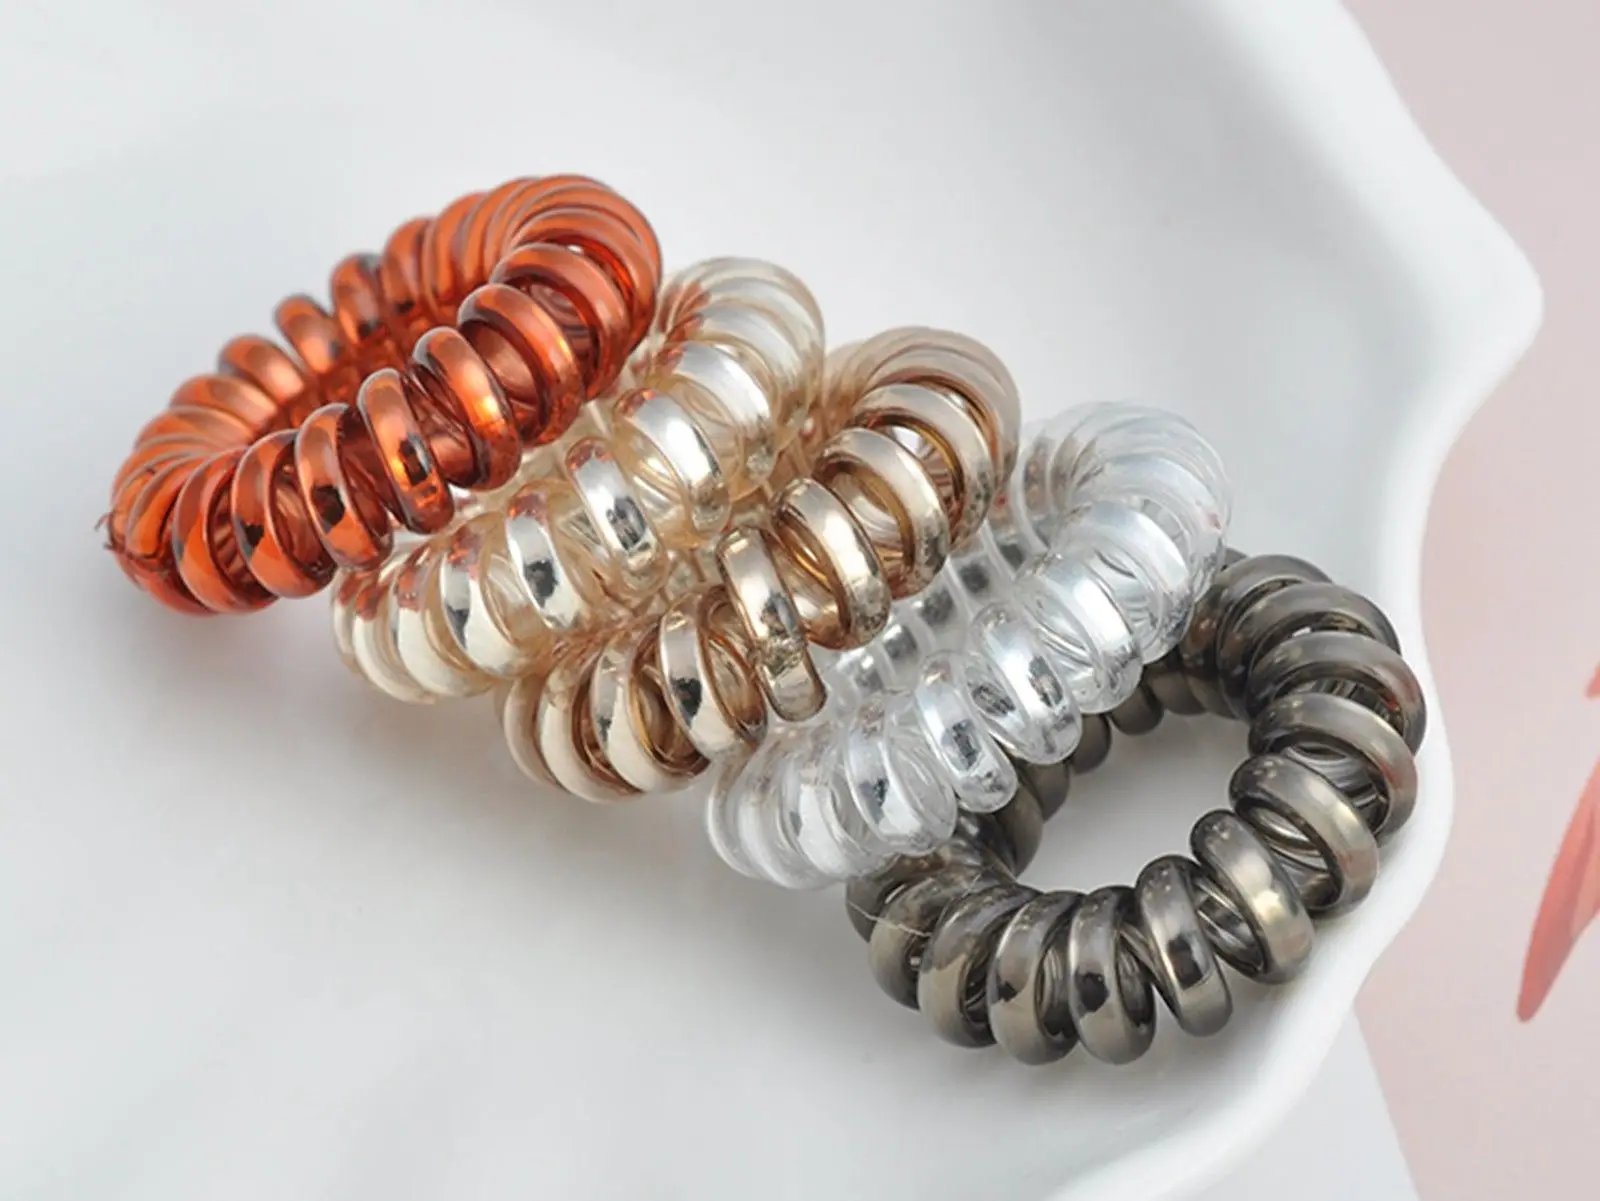 10 Spiral Coil Jelly Elastic Hair Scrunchies Telephone Cord Ponytail Holder 36mm mosquito coil holder mosquito repellent incense box